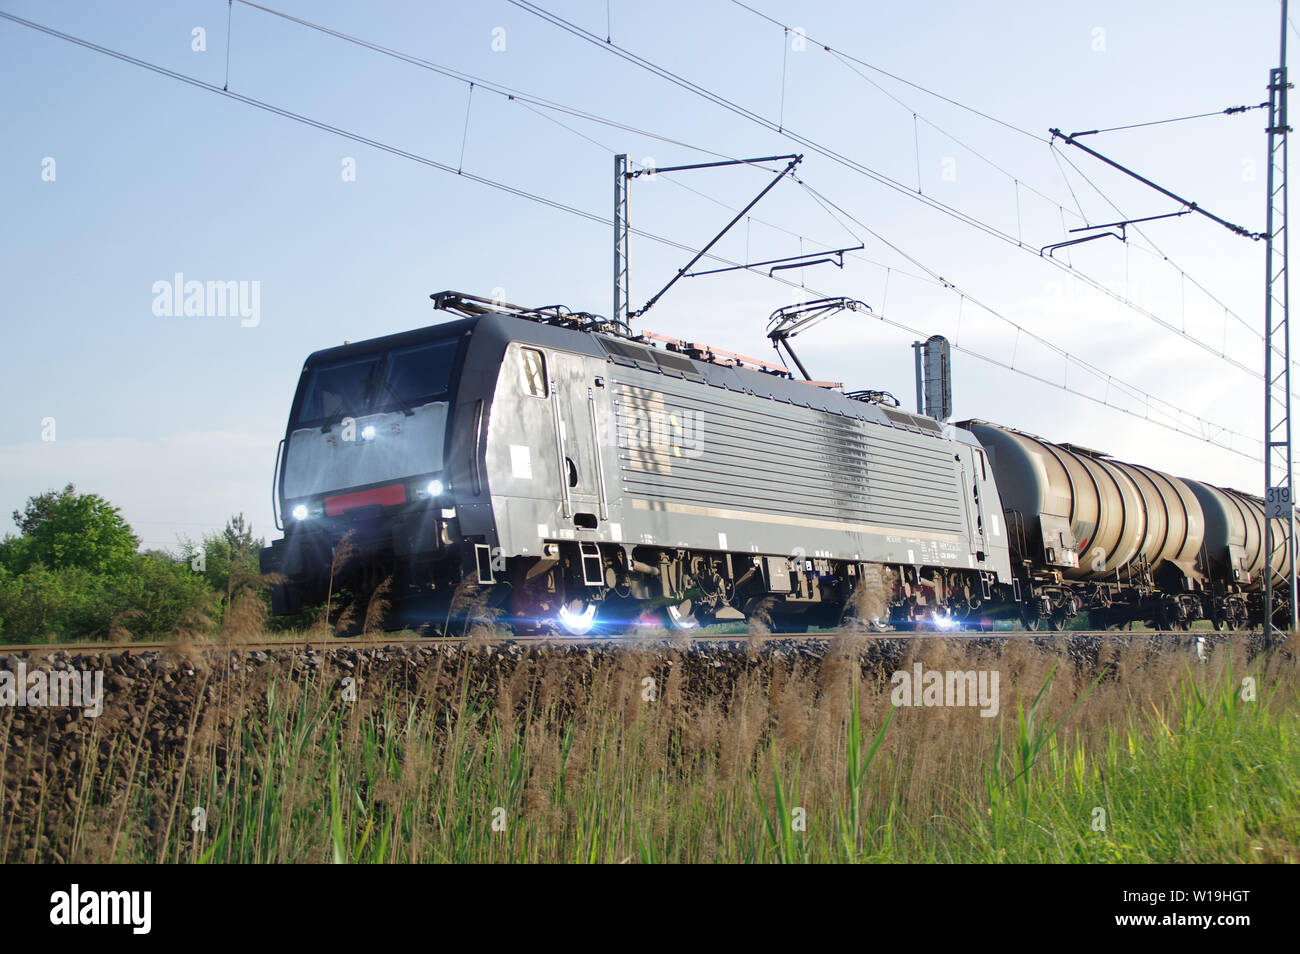 Fast electric train on tracks. Freight railway transport in Europe. Stock Photo